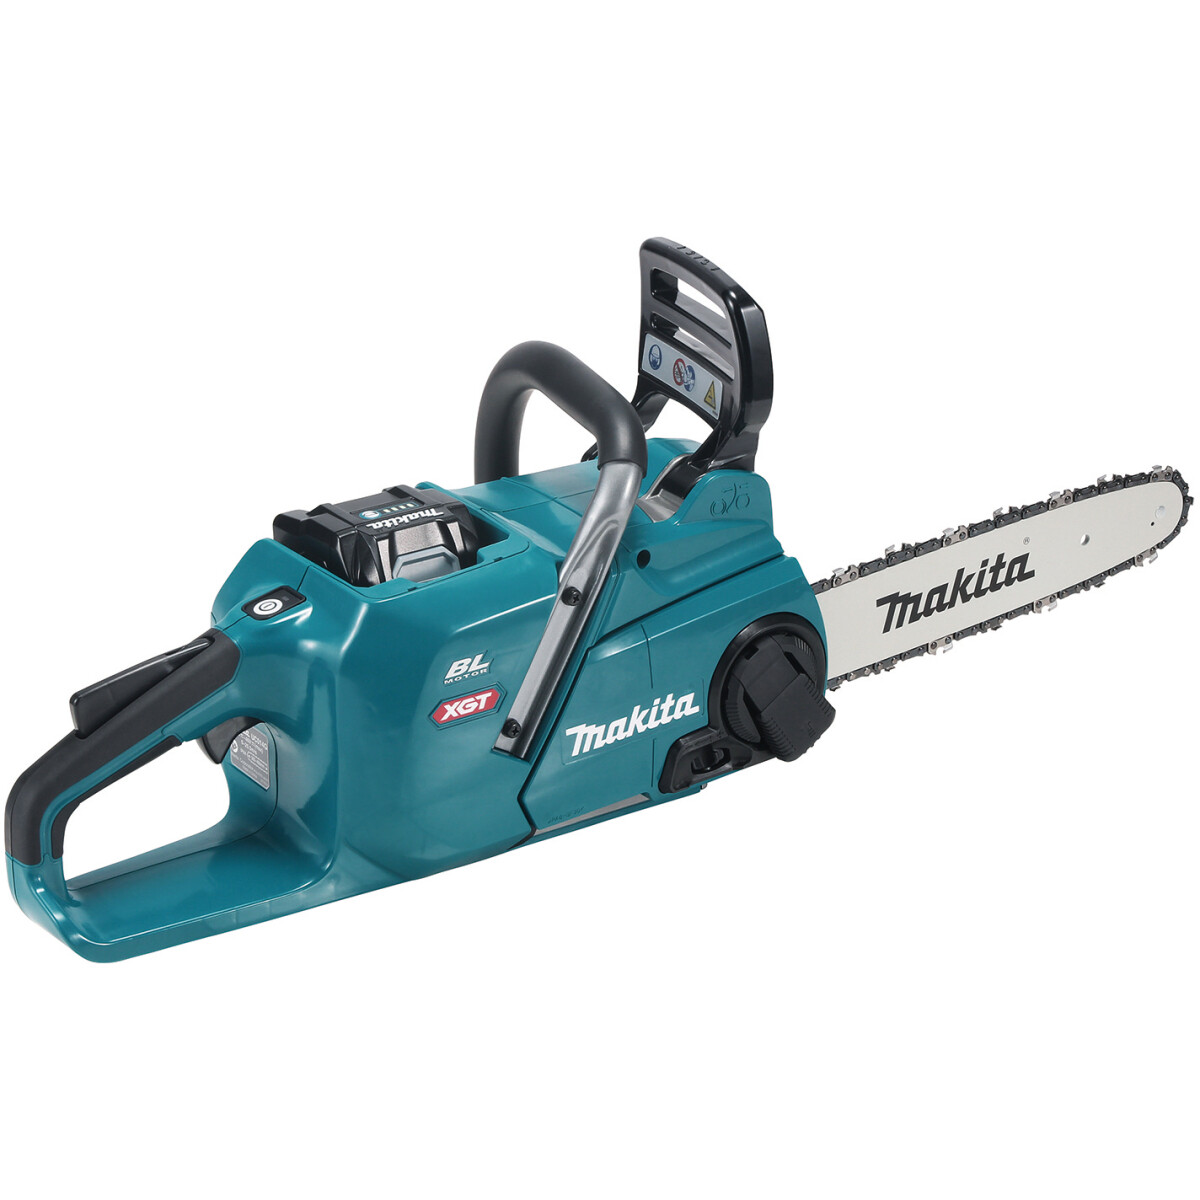 Makita UC014GT201 40v 40Vmax Chainsaw 30cm Bar with 2 x 5.0Ah Batteries and Charger